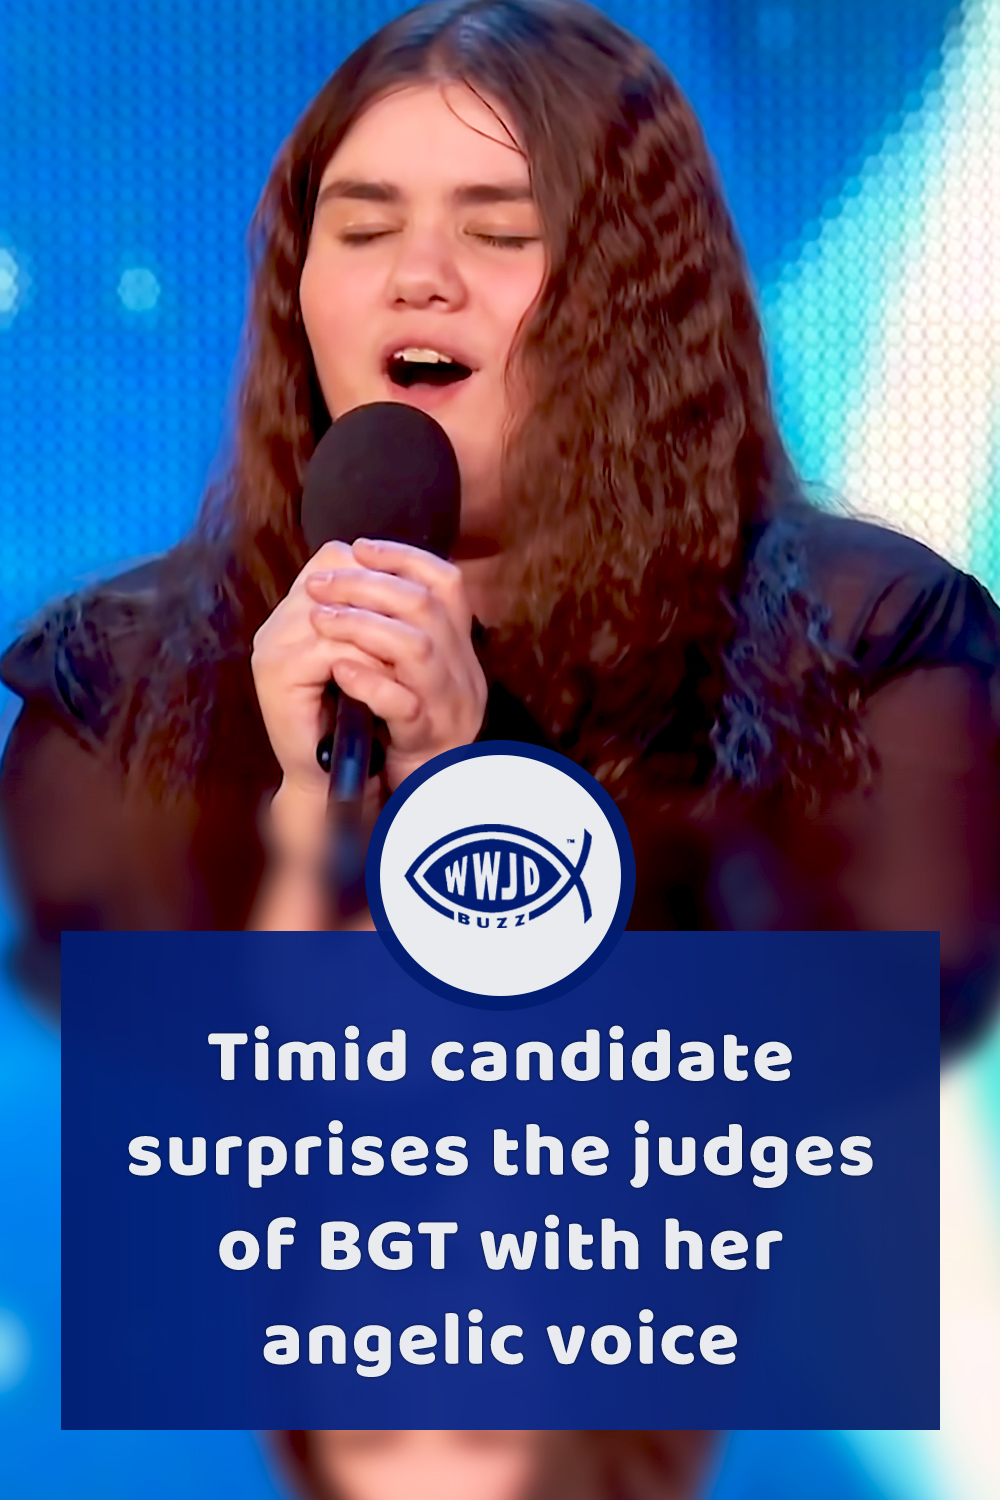 Timid candidate surprises the judges of BGT with her angelic voice